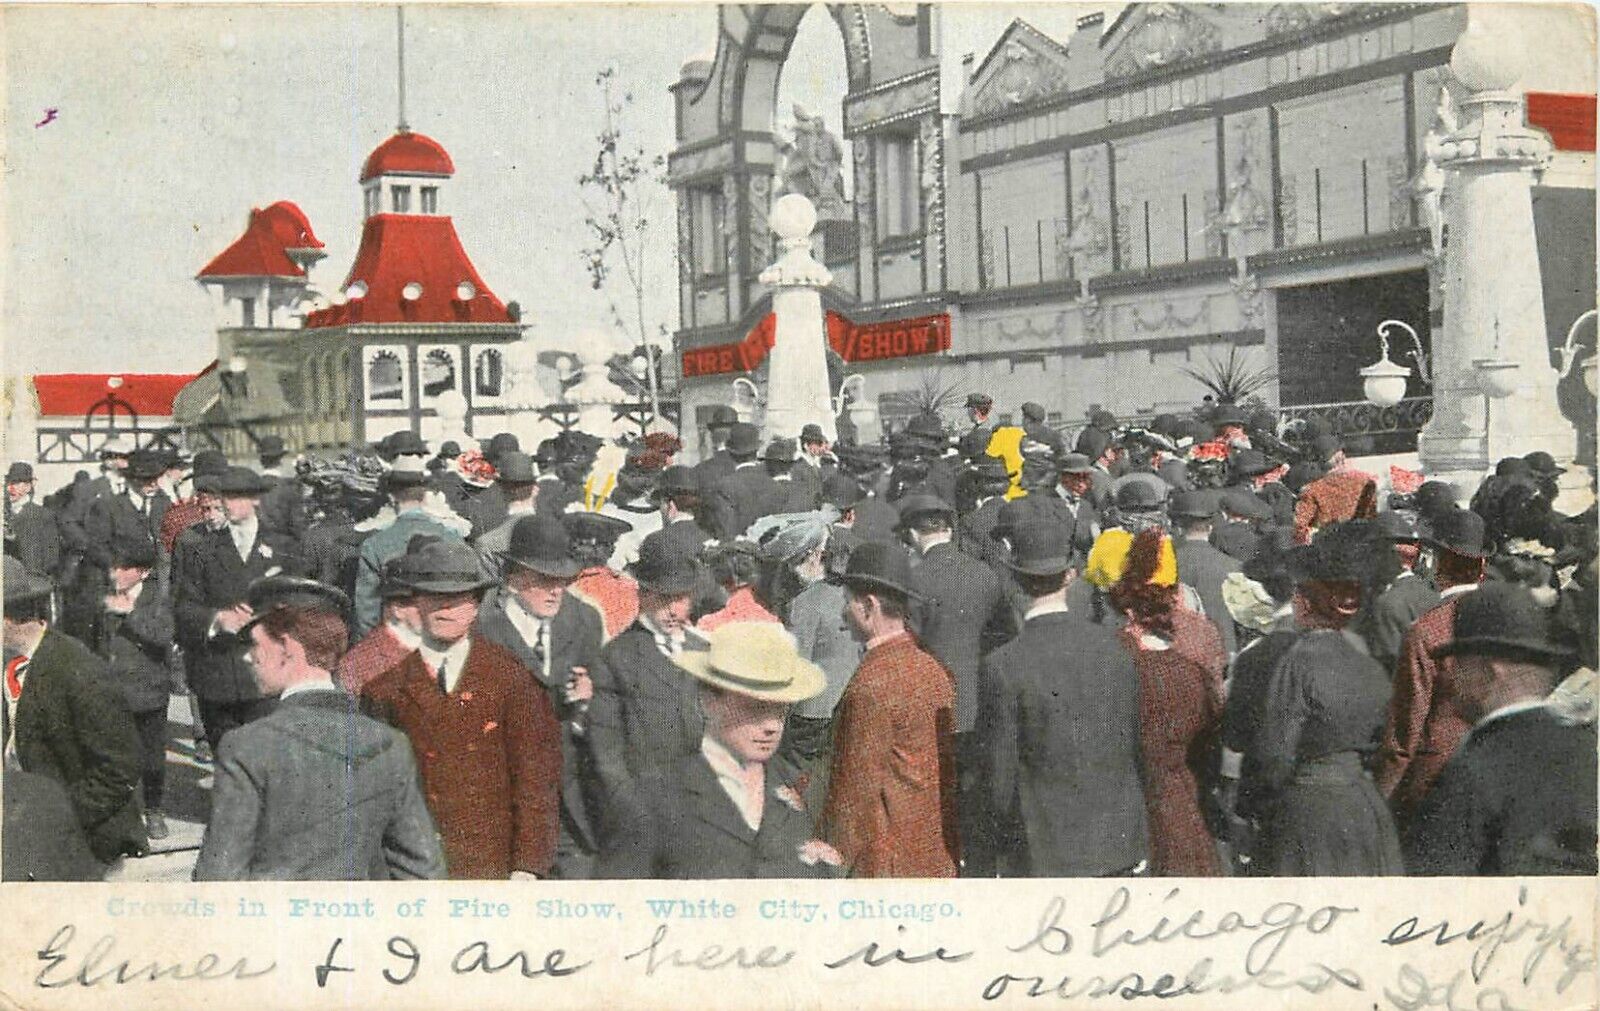 1906 Crowd in Front of Fire Show, White City, Chicago, Illinois Postcard